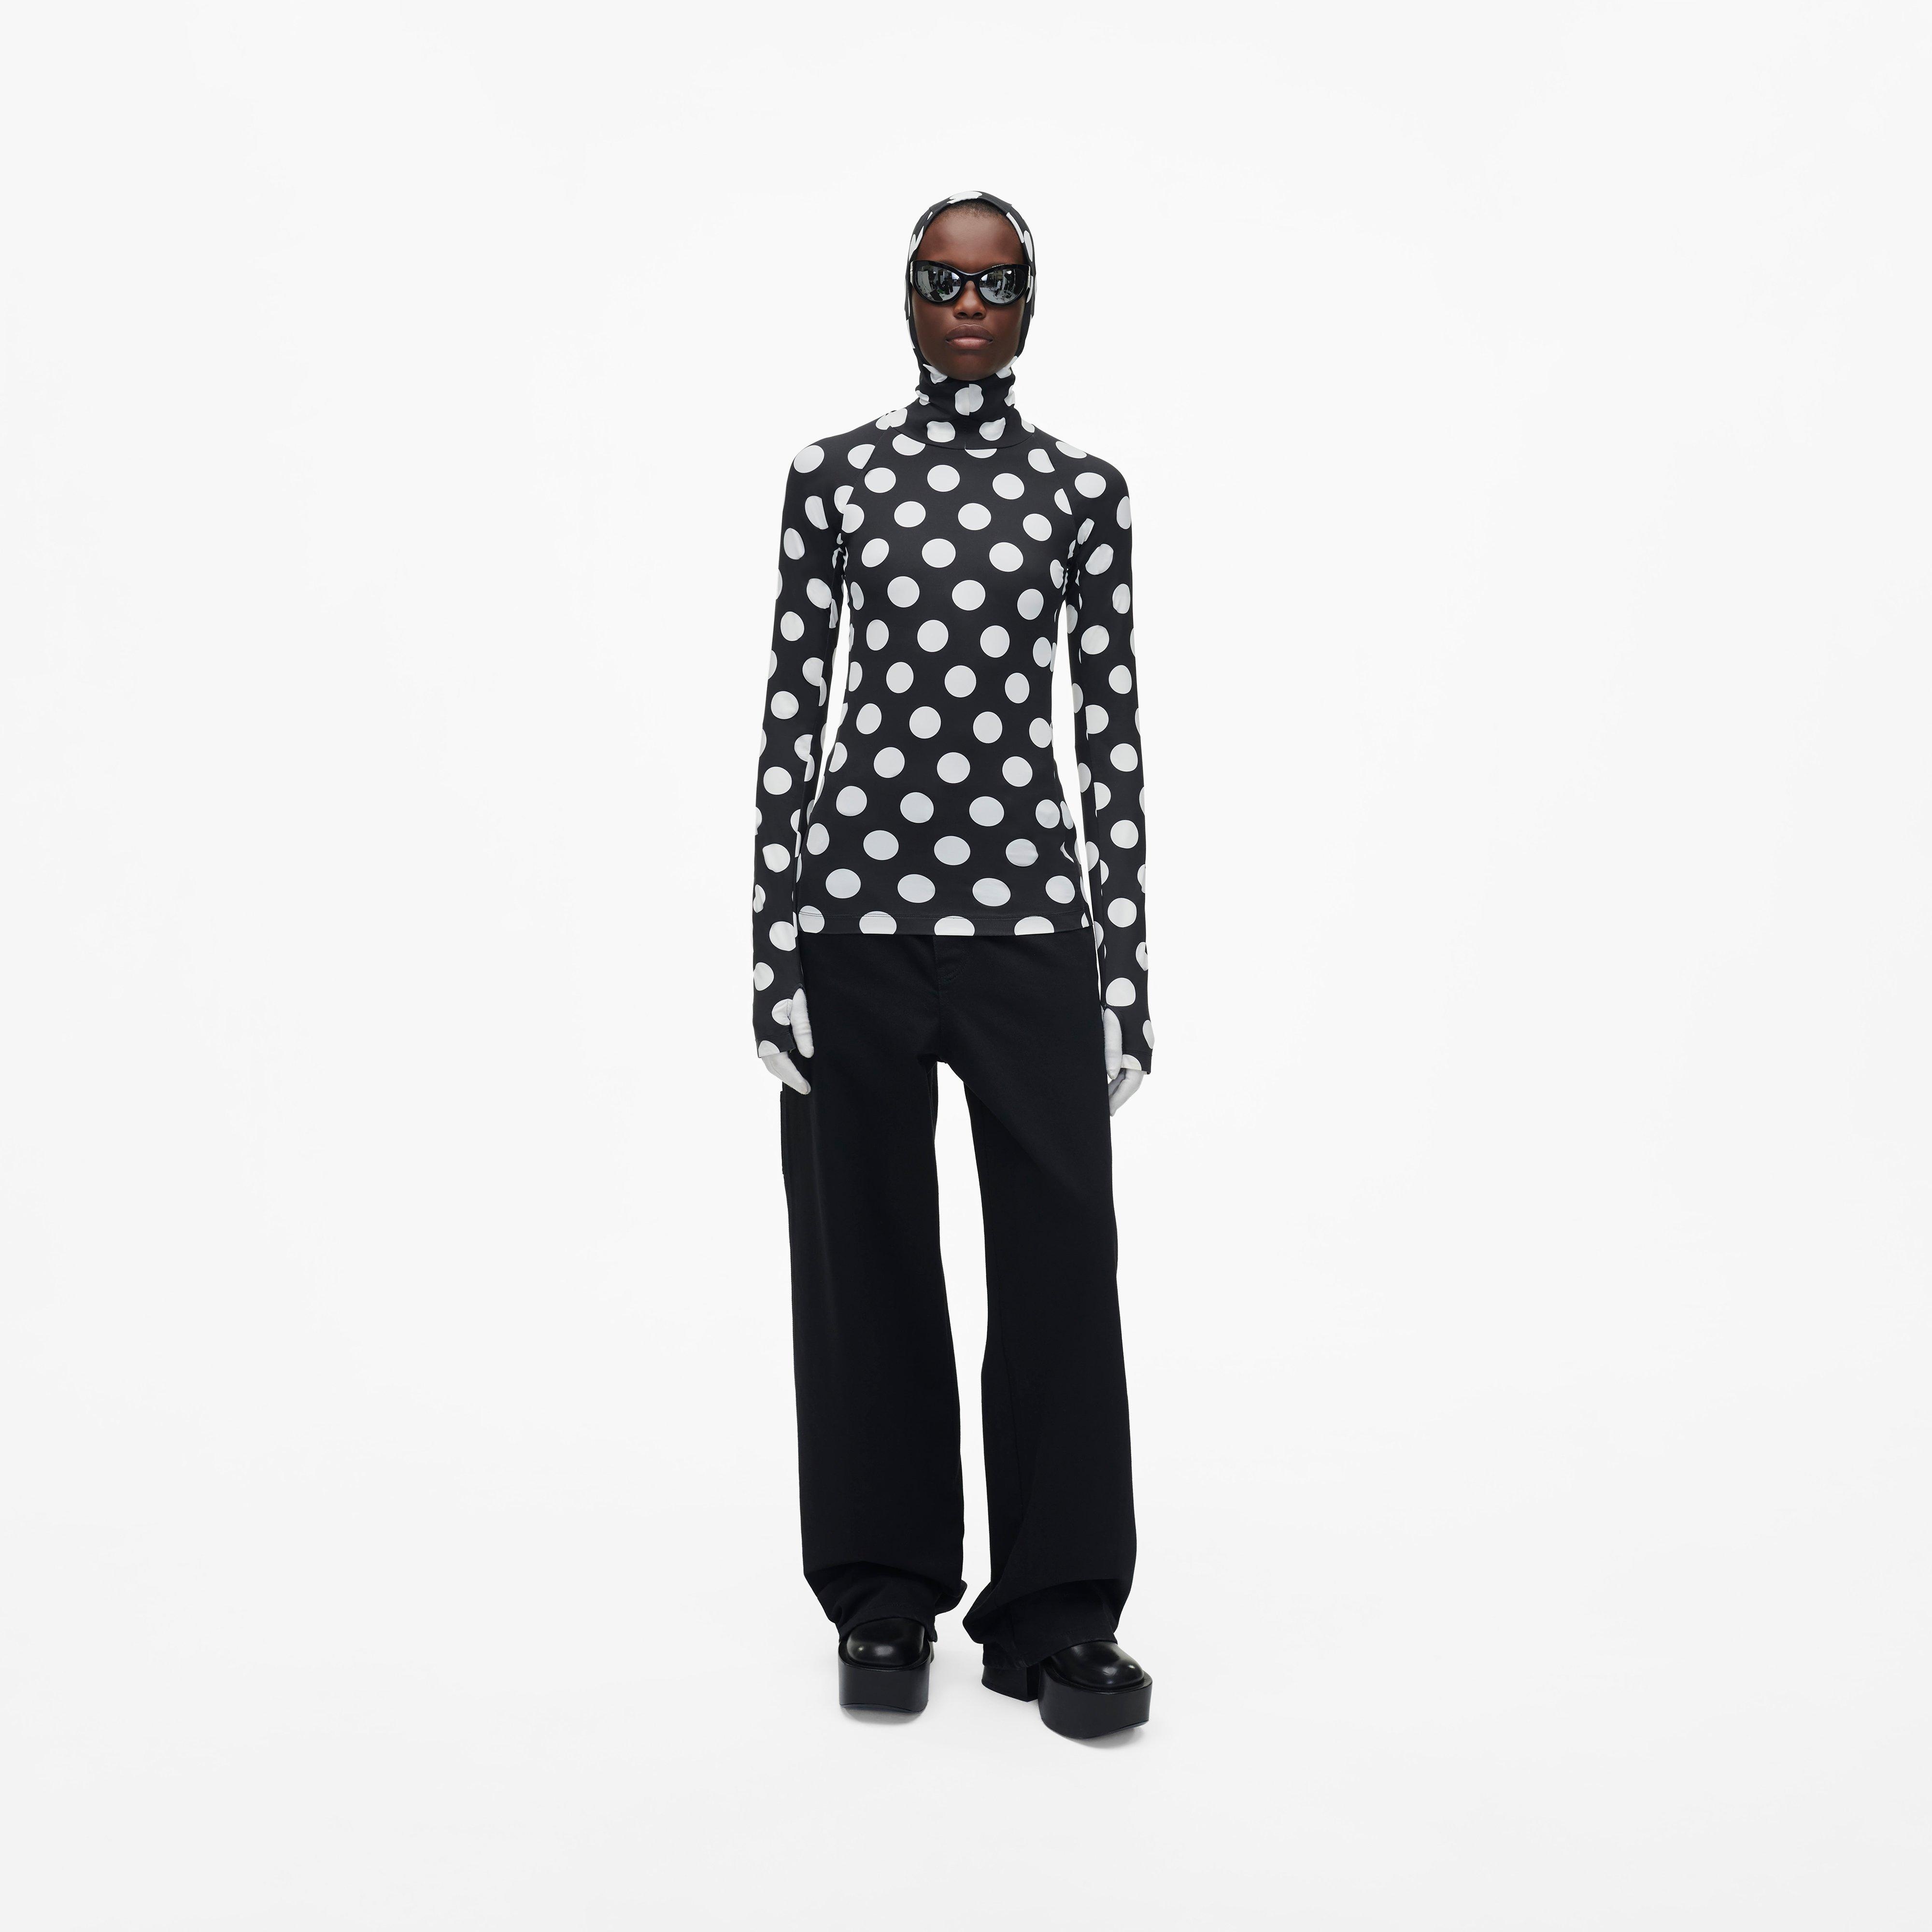 THE SPOTS HOODED LONG SLEEVE - 2